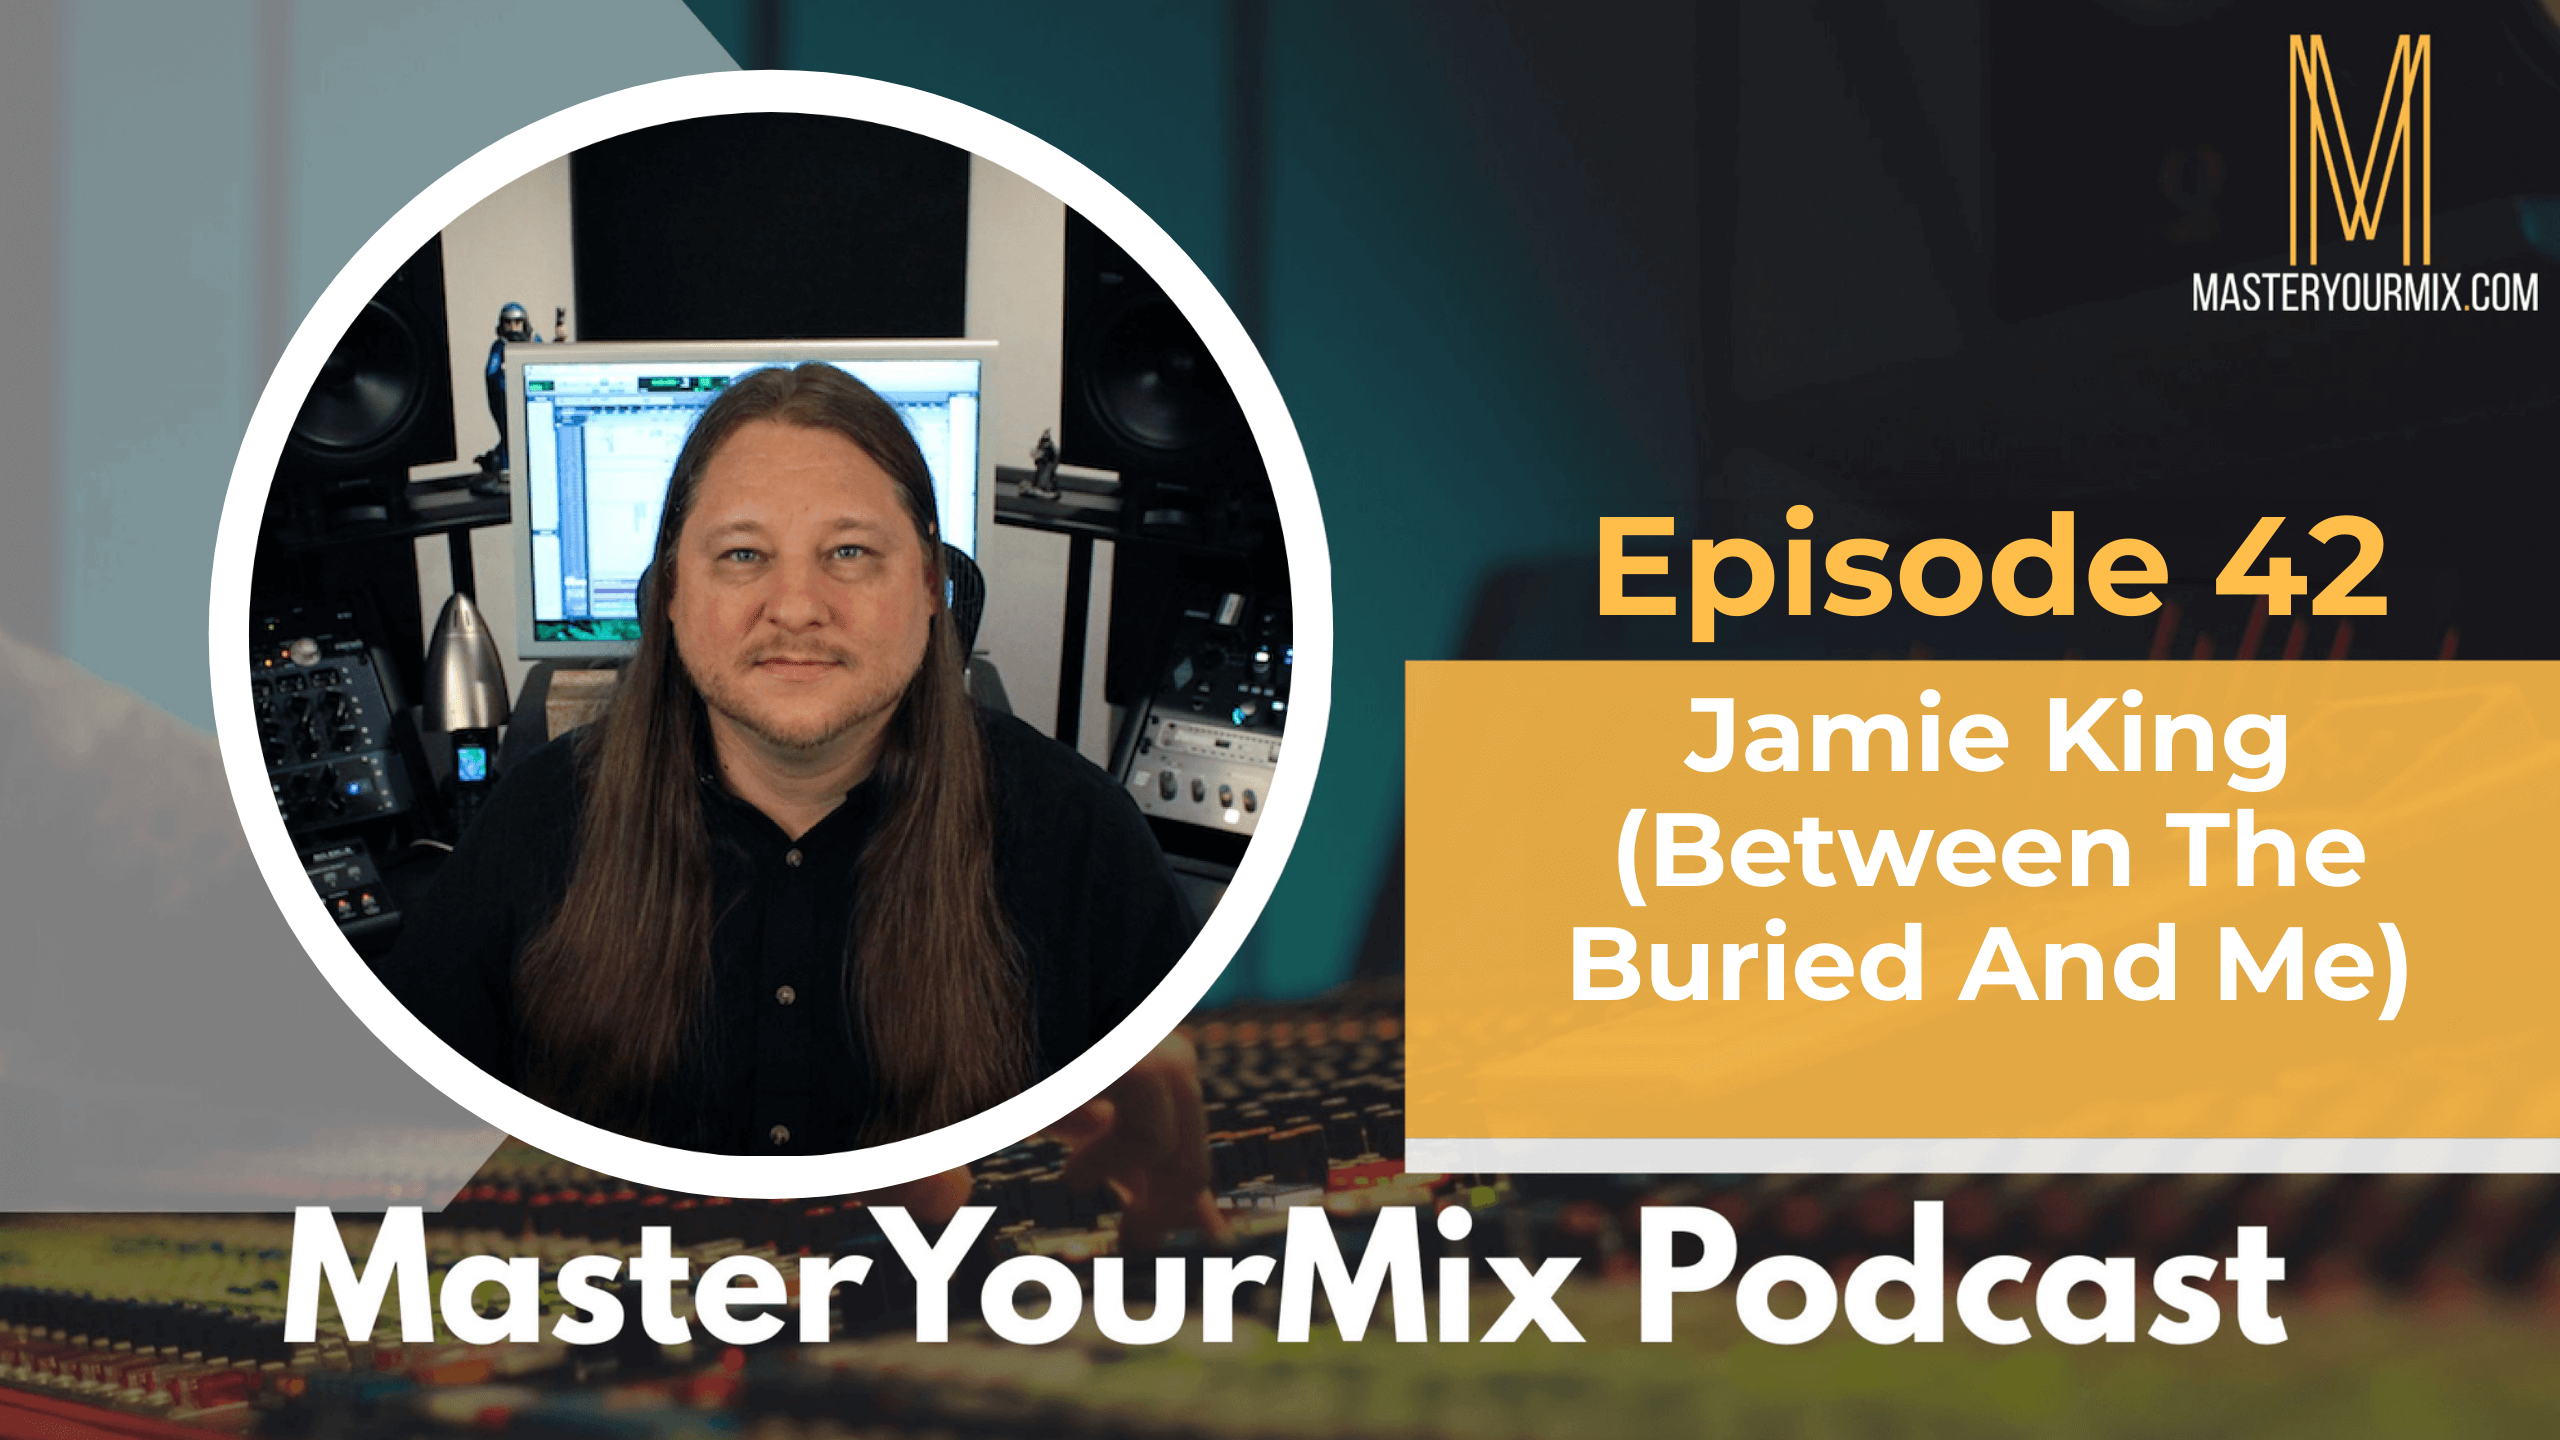 master your mix podcast, ep 42 jamie king